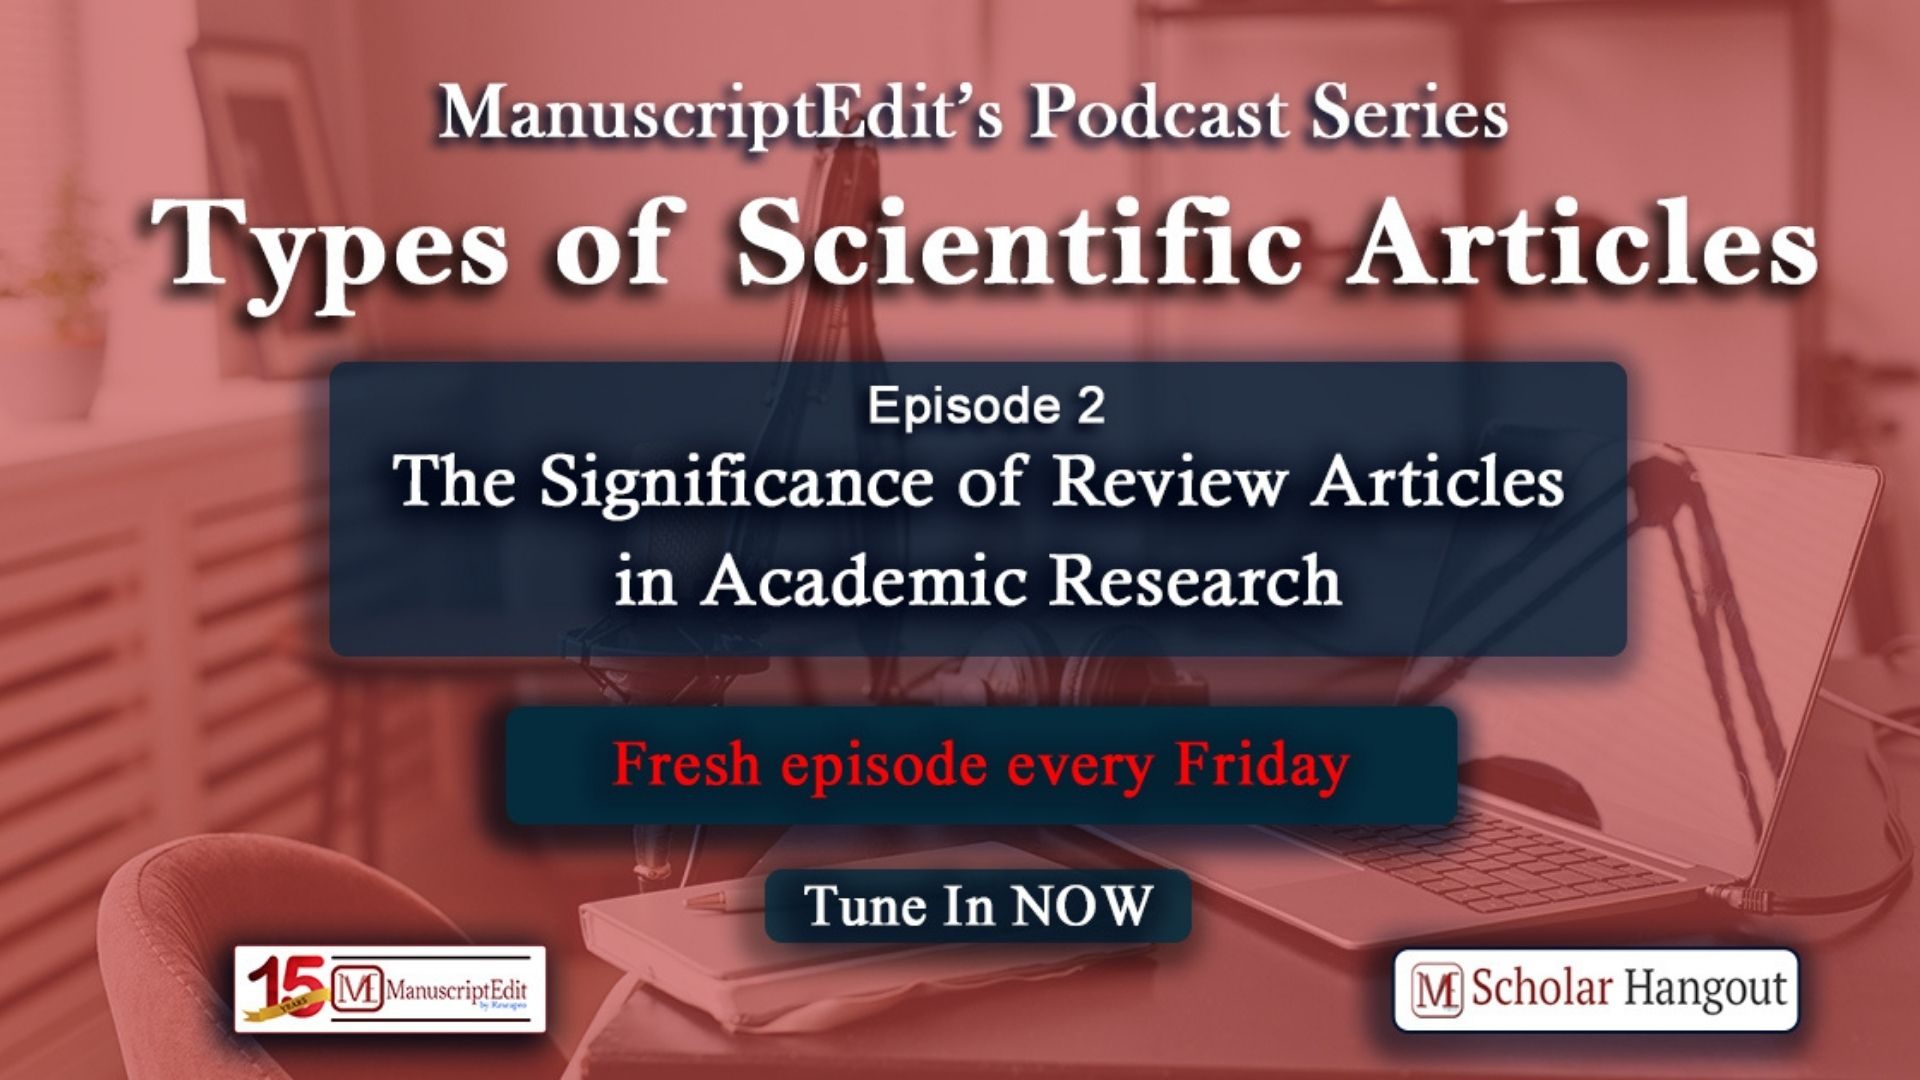 Episode 2: The Significance of Review Articles in Academic Research